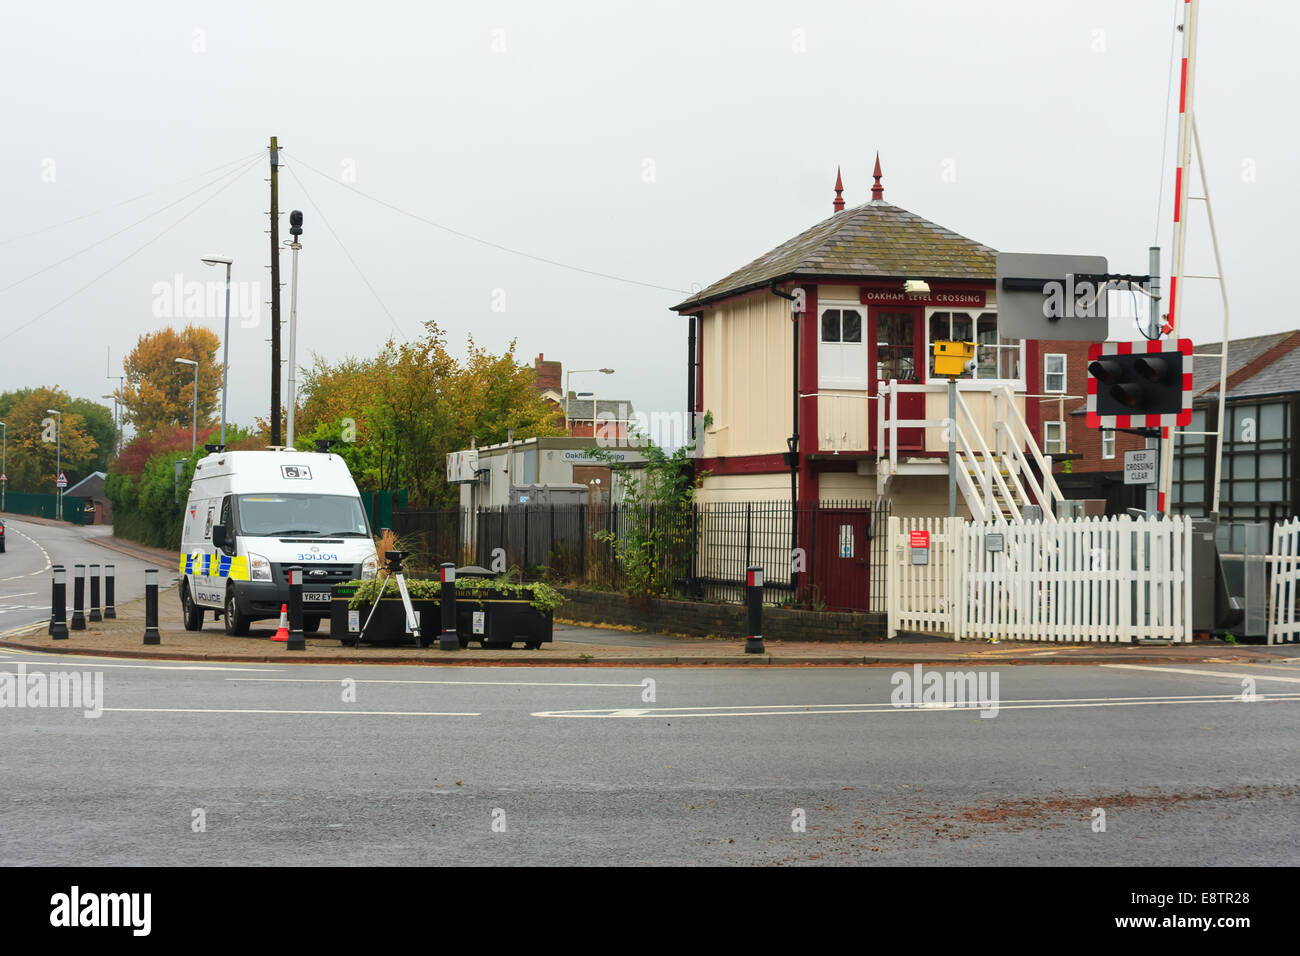 Oakham, Rutland, UK. 14th October, 2014. British Transport Police camera van monitors Oakham town rail crossing Rutland, England, UK.. The crossing has the 3rd highest number of driving offences in the country where drivers risk lives by driving through the crossing barriers when the stop lights are flashing. Credit:  Jim Harrison/Alamy Live News Stock Photo